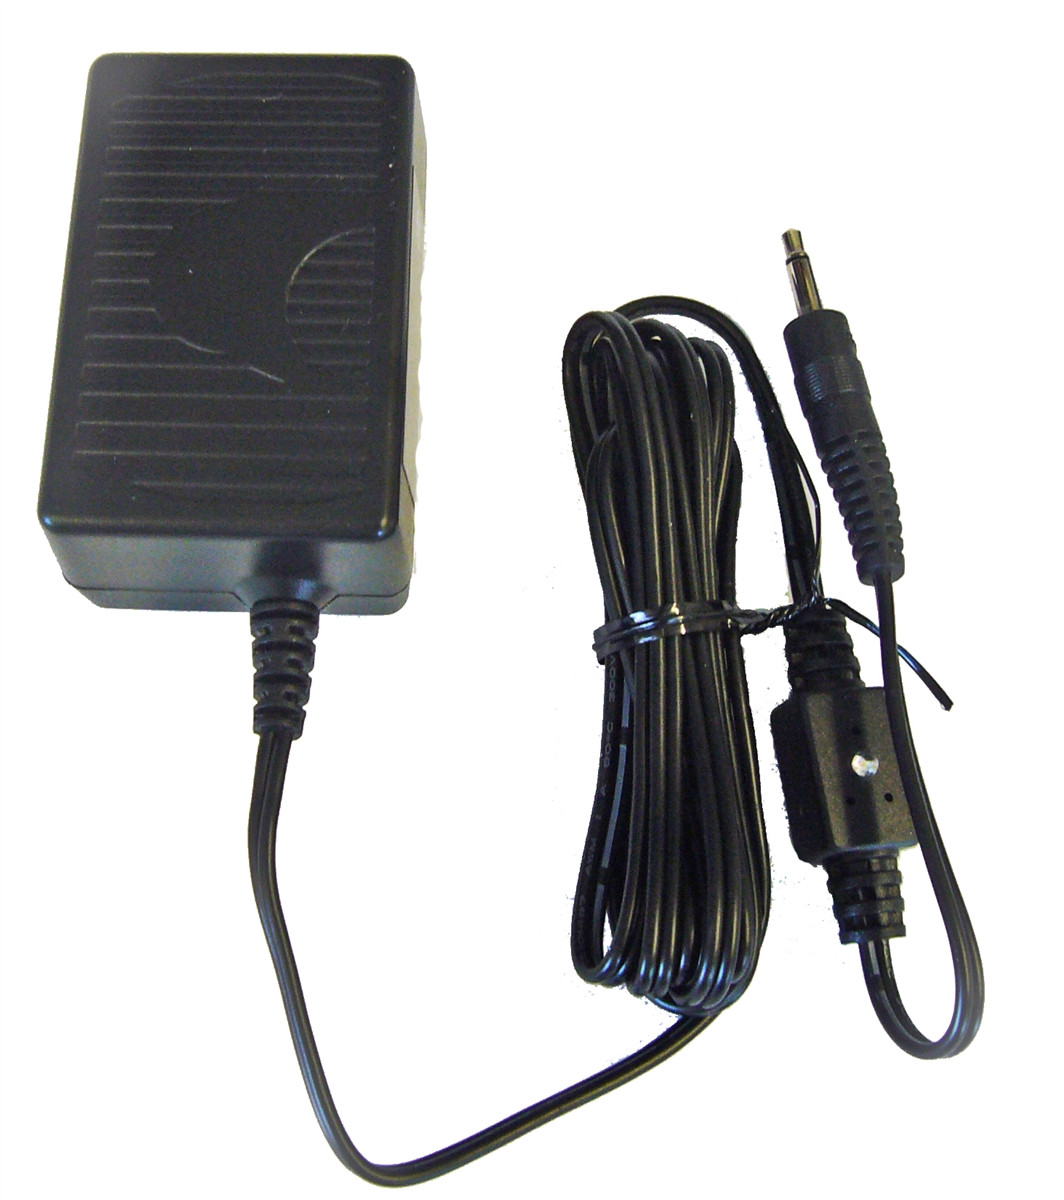 Leica Rugby 50/55/100/100LR/200 Battery Charger (727165) - Kara Company,  Inc.